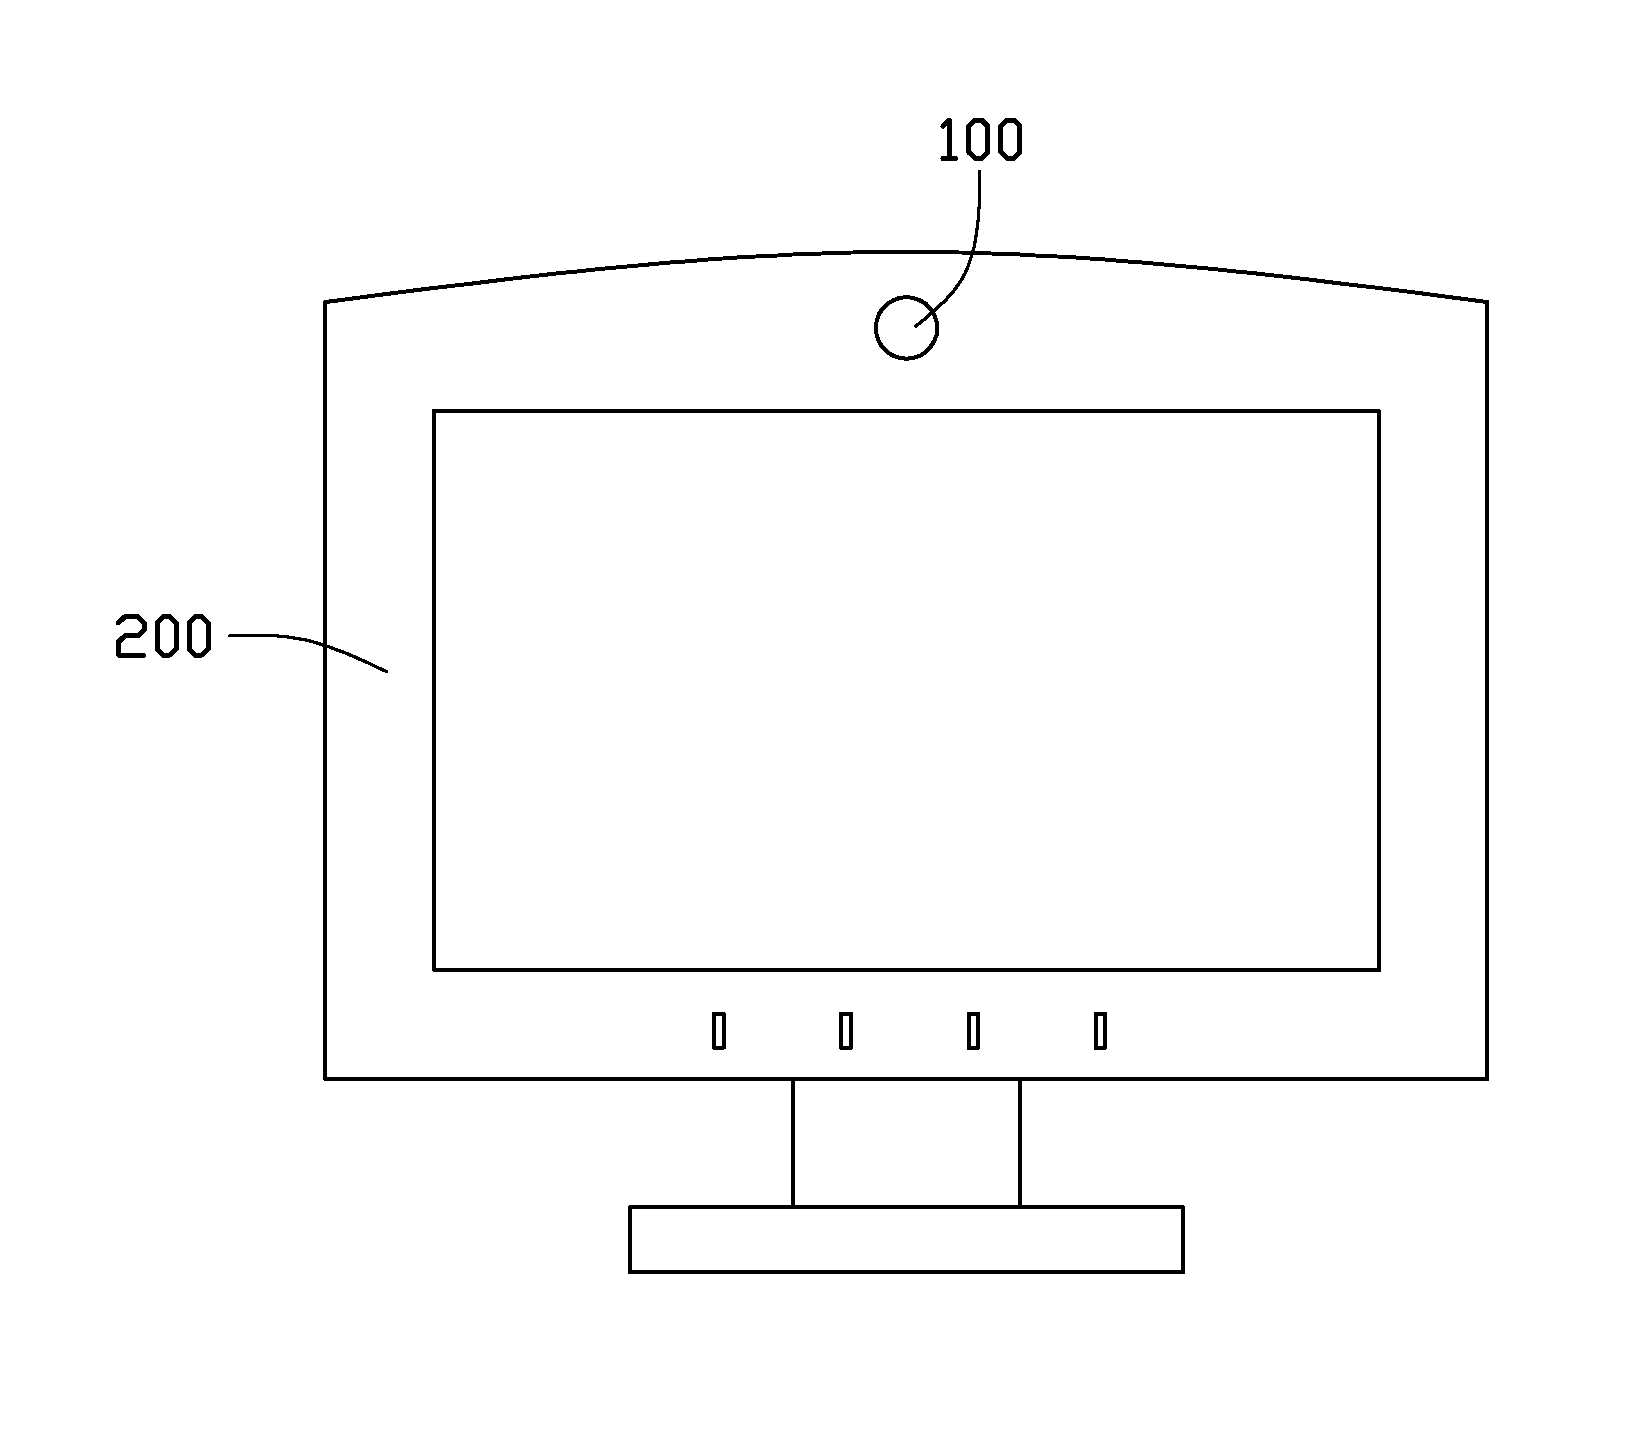 Eye protection apparatus and method